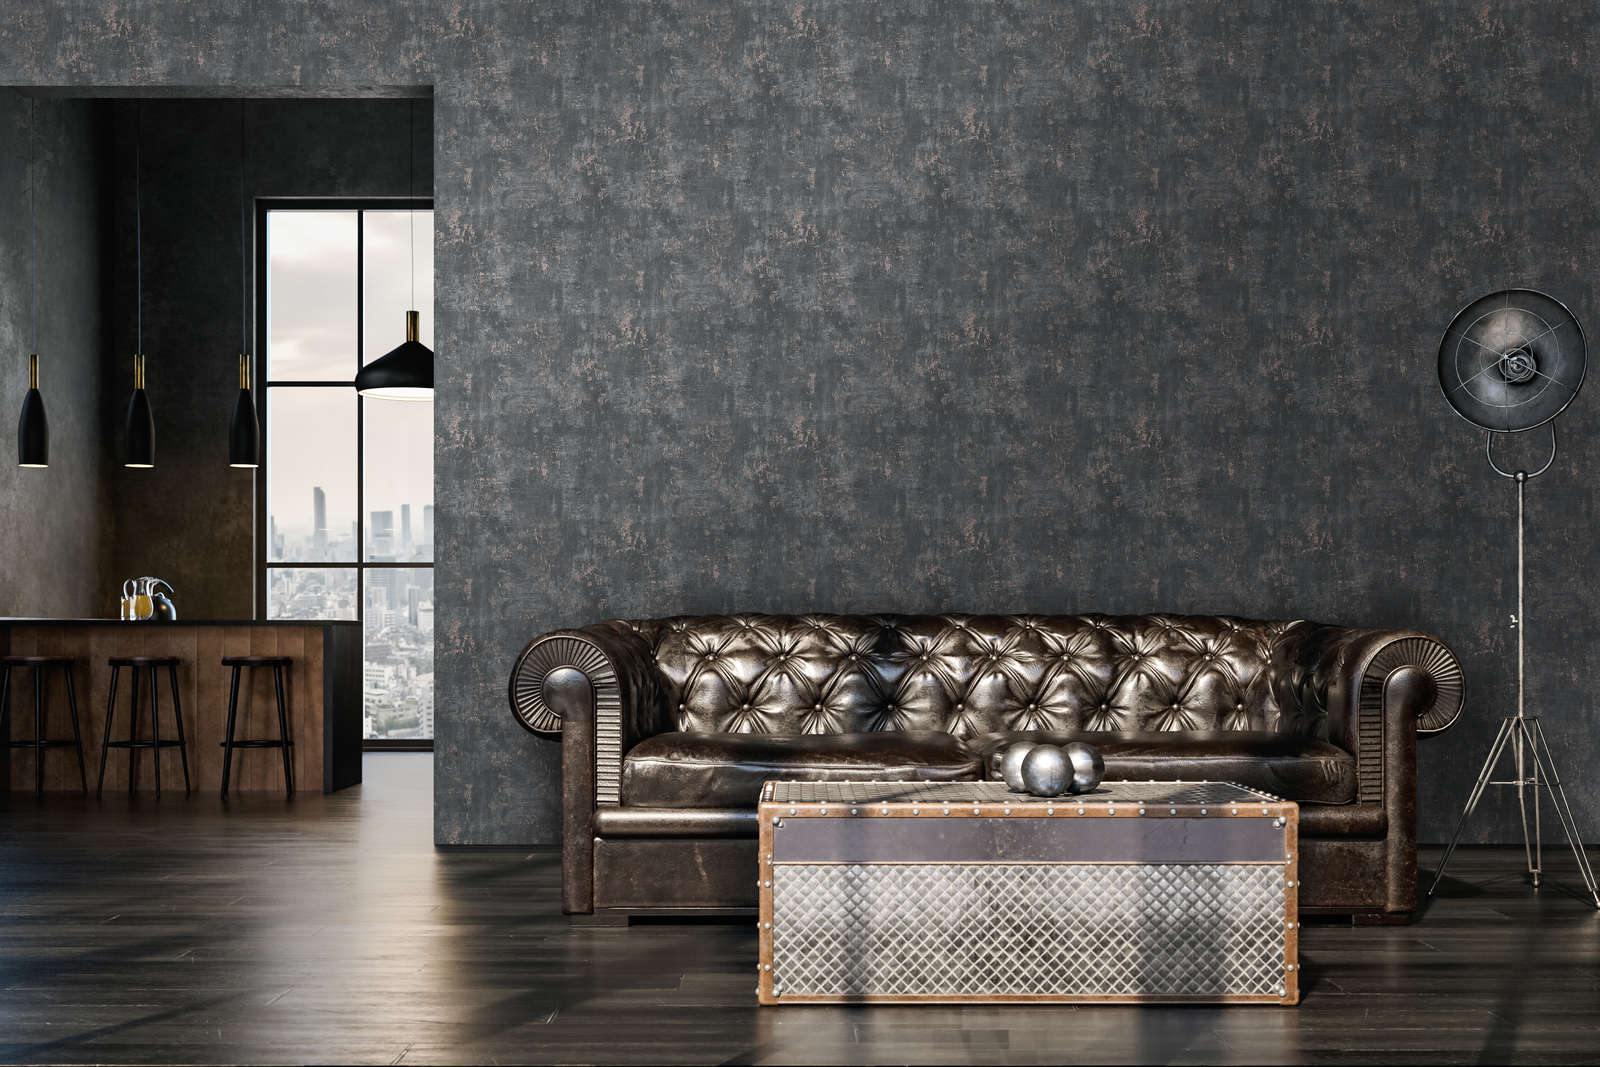             Used look wallpaper with metallic accents - black, rose gold
        